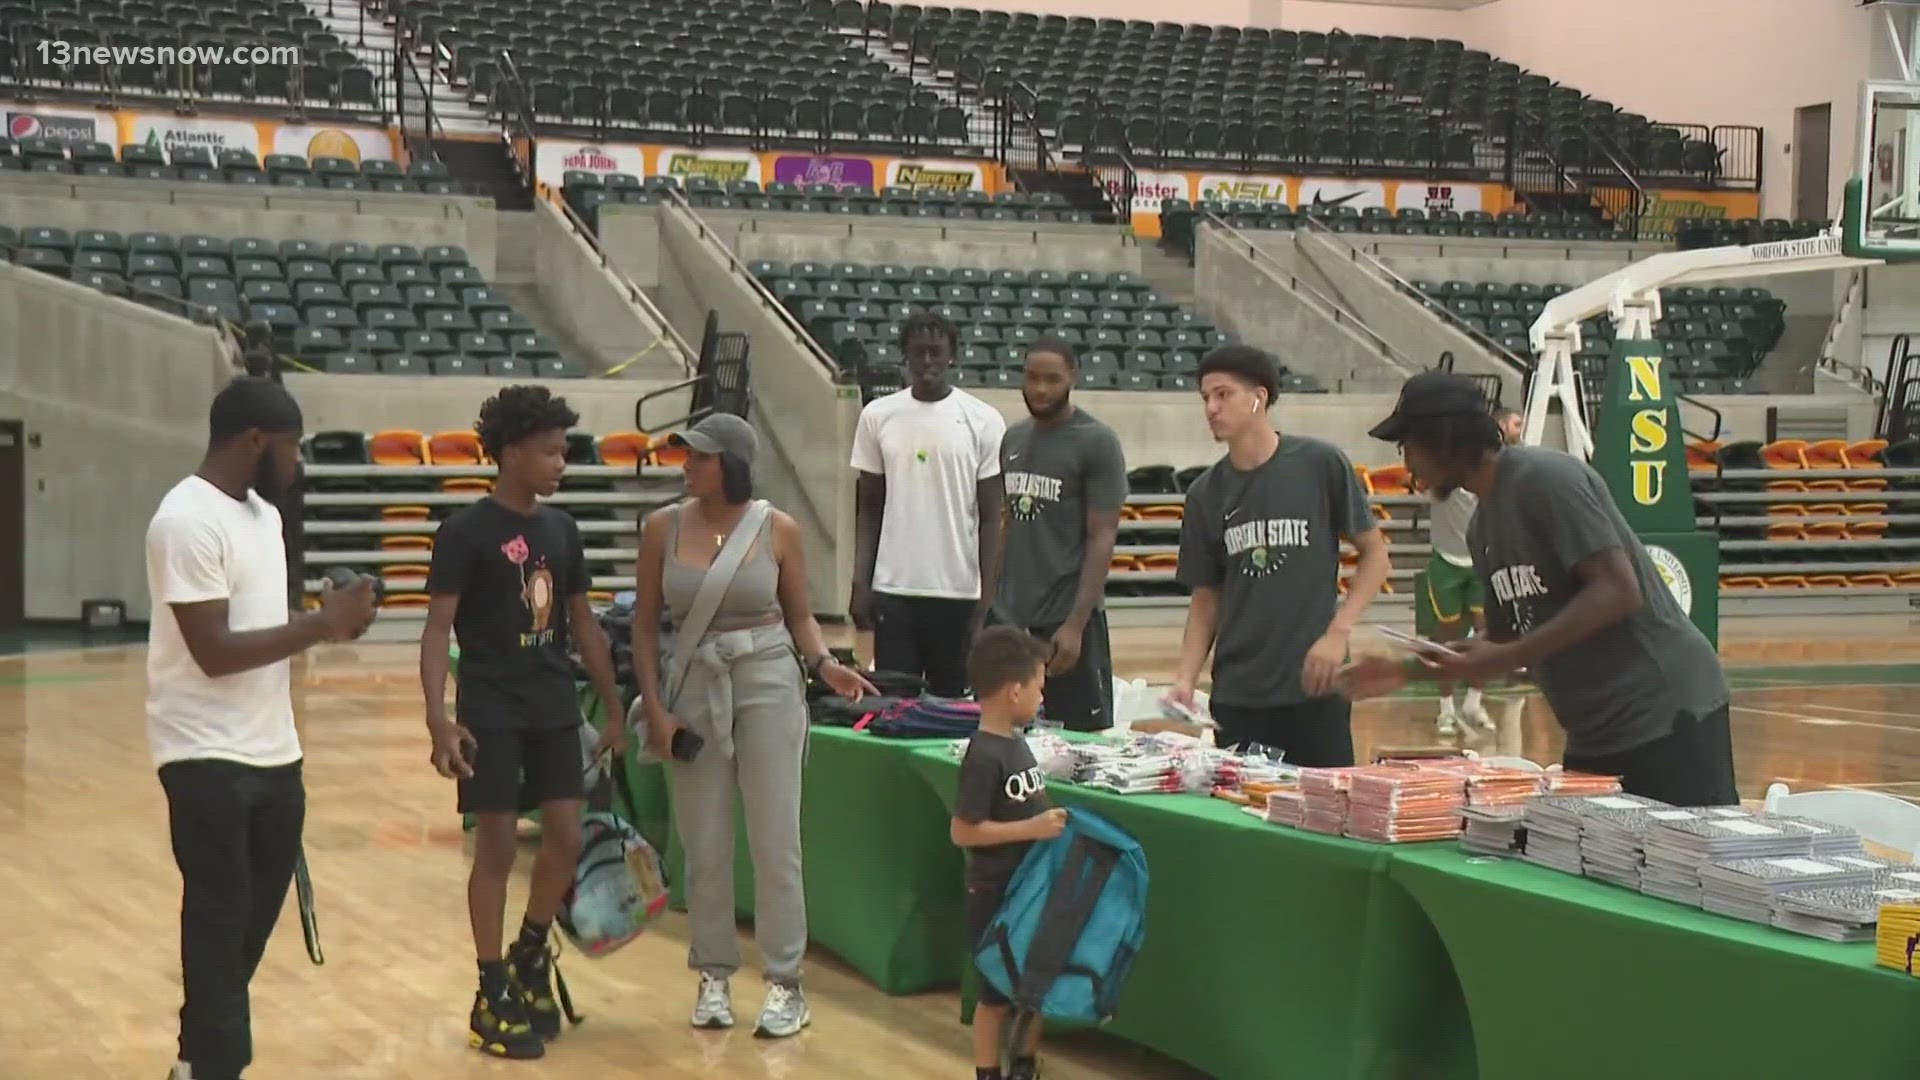 Attendees were able to receive free school supplies and the opportunity to meet the men's basketball team.